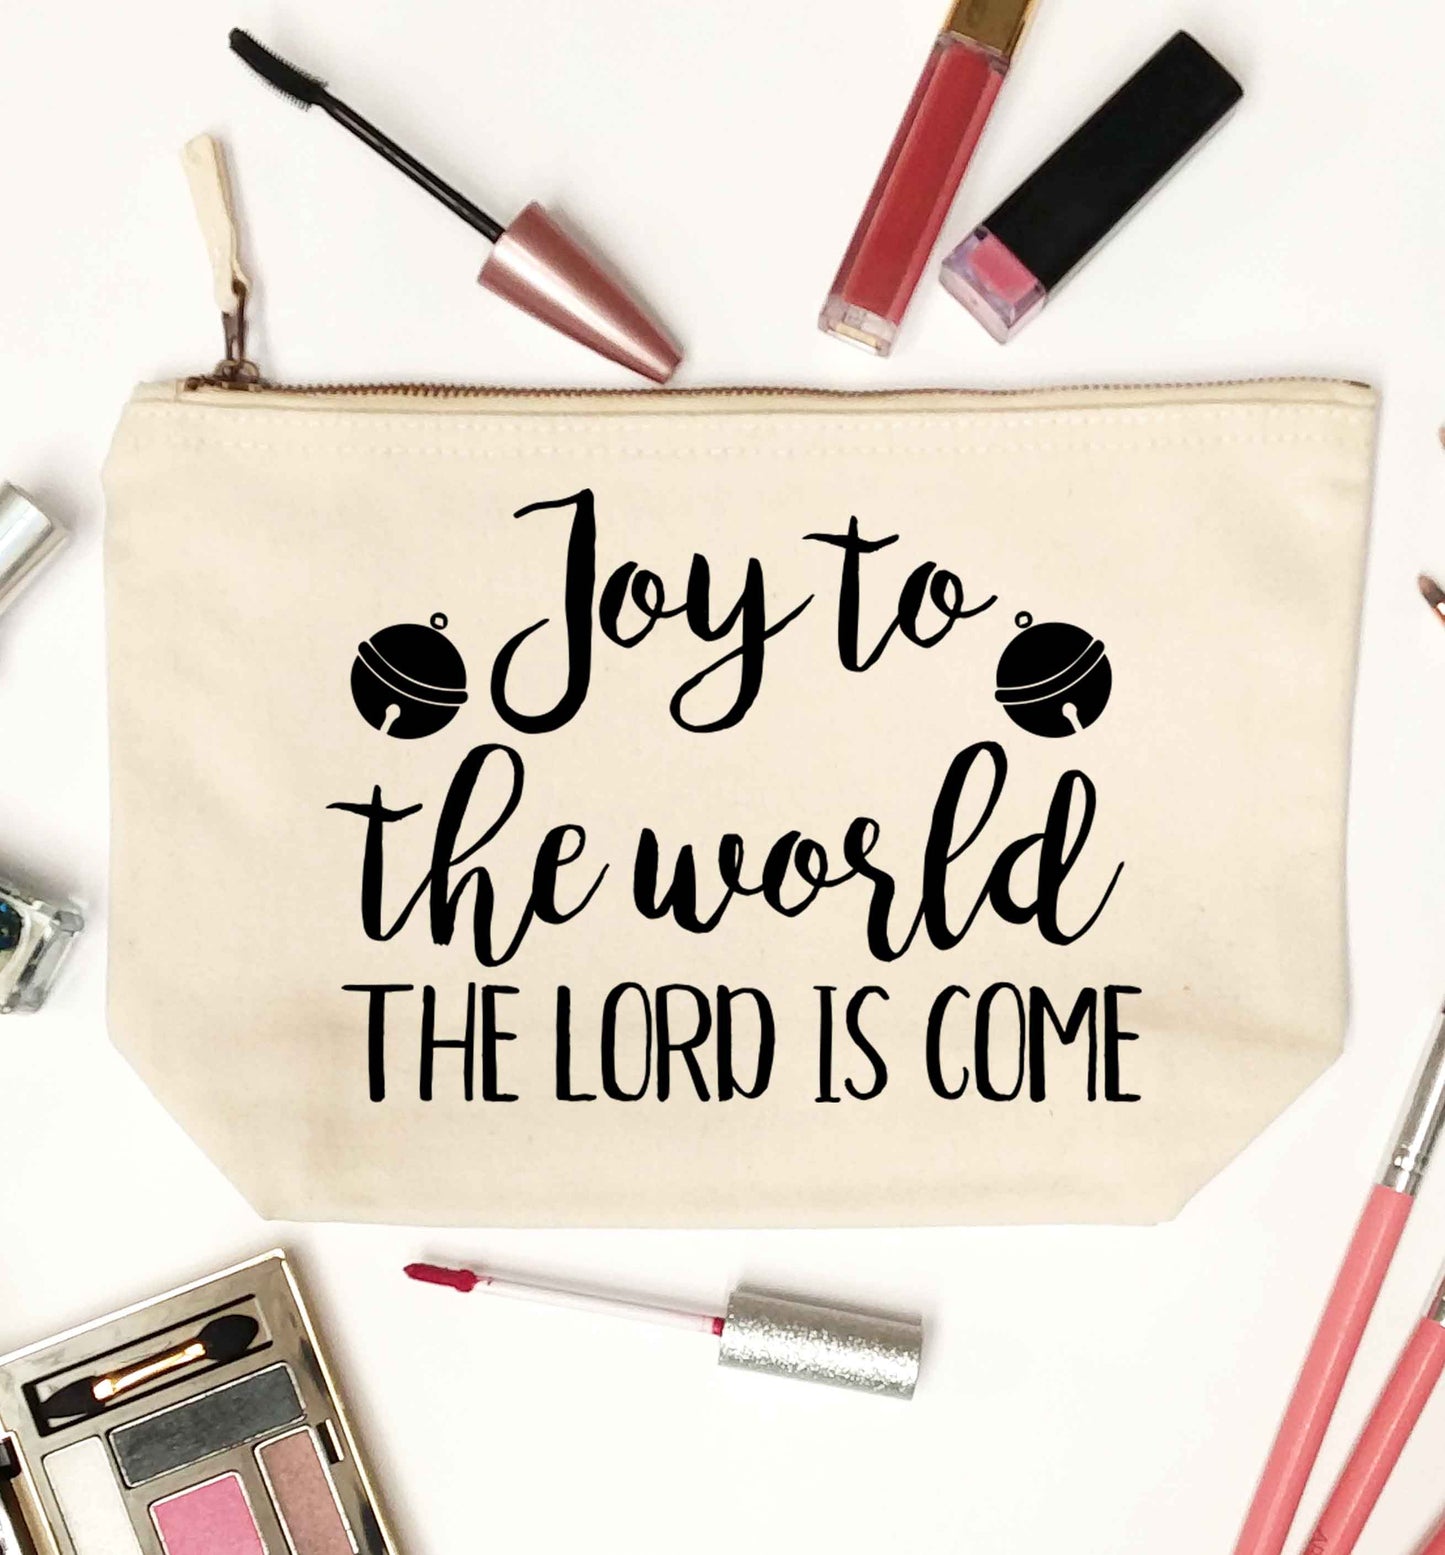 Joy to the world the Lord is come natural makeup bag